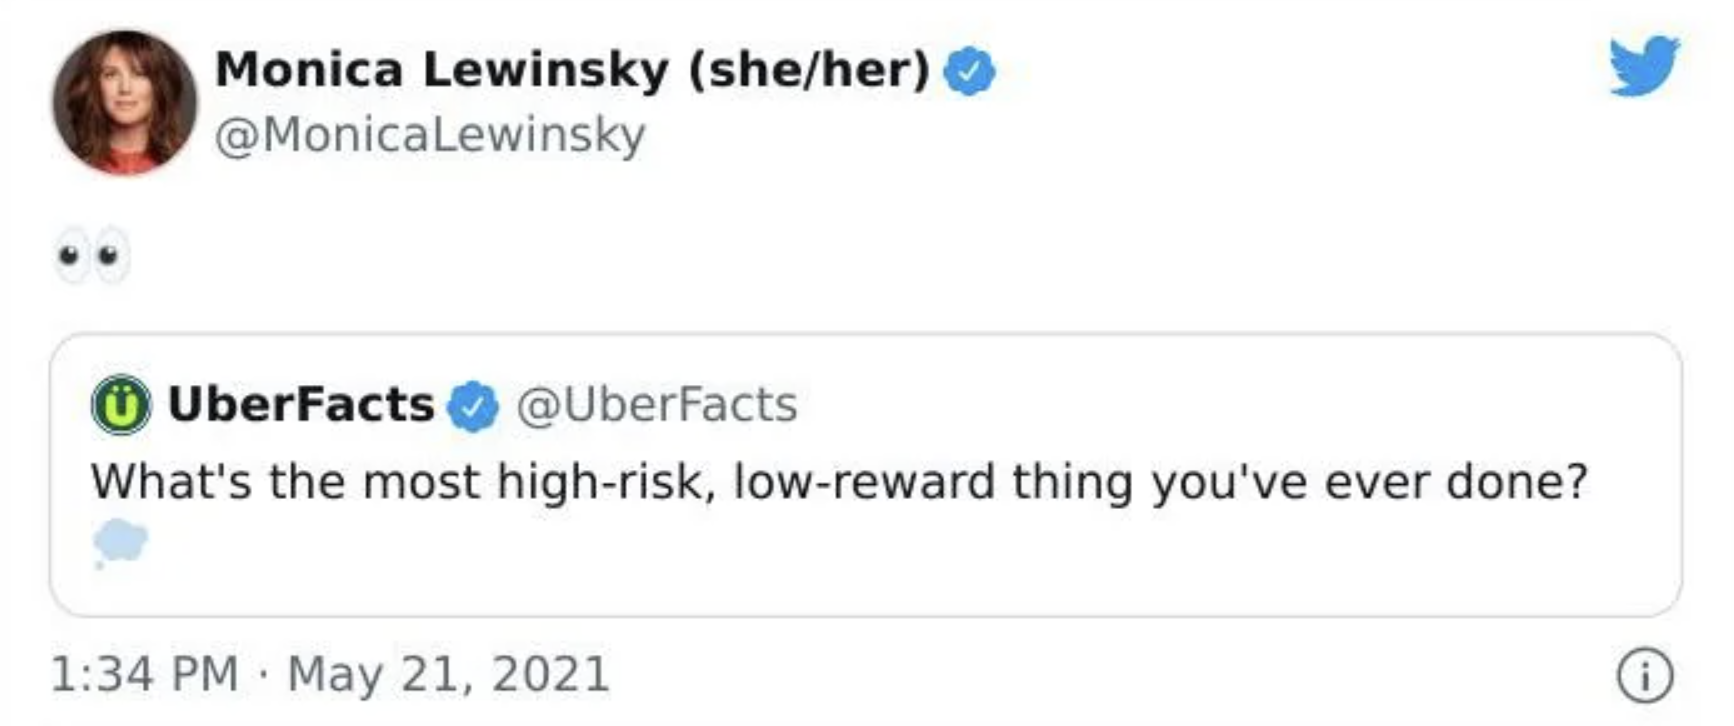 screenshot - Monica Lewinsky sheher Lewinsky UberFacts What's the most highrisk, lowreward thing you've ever done?